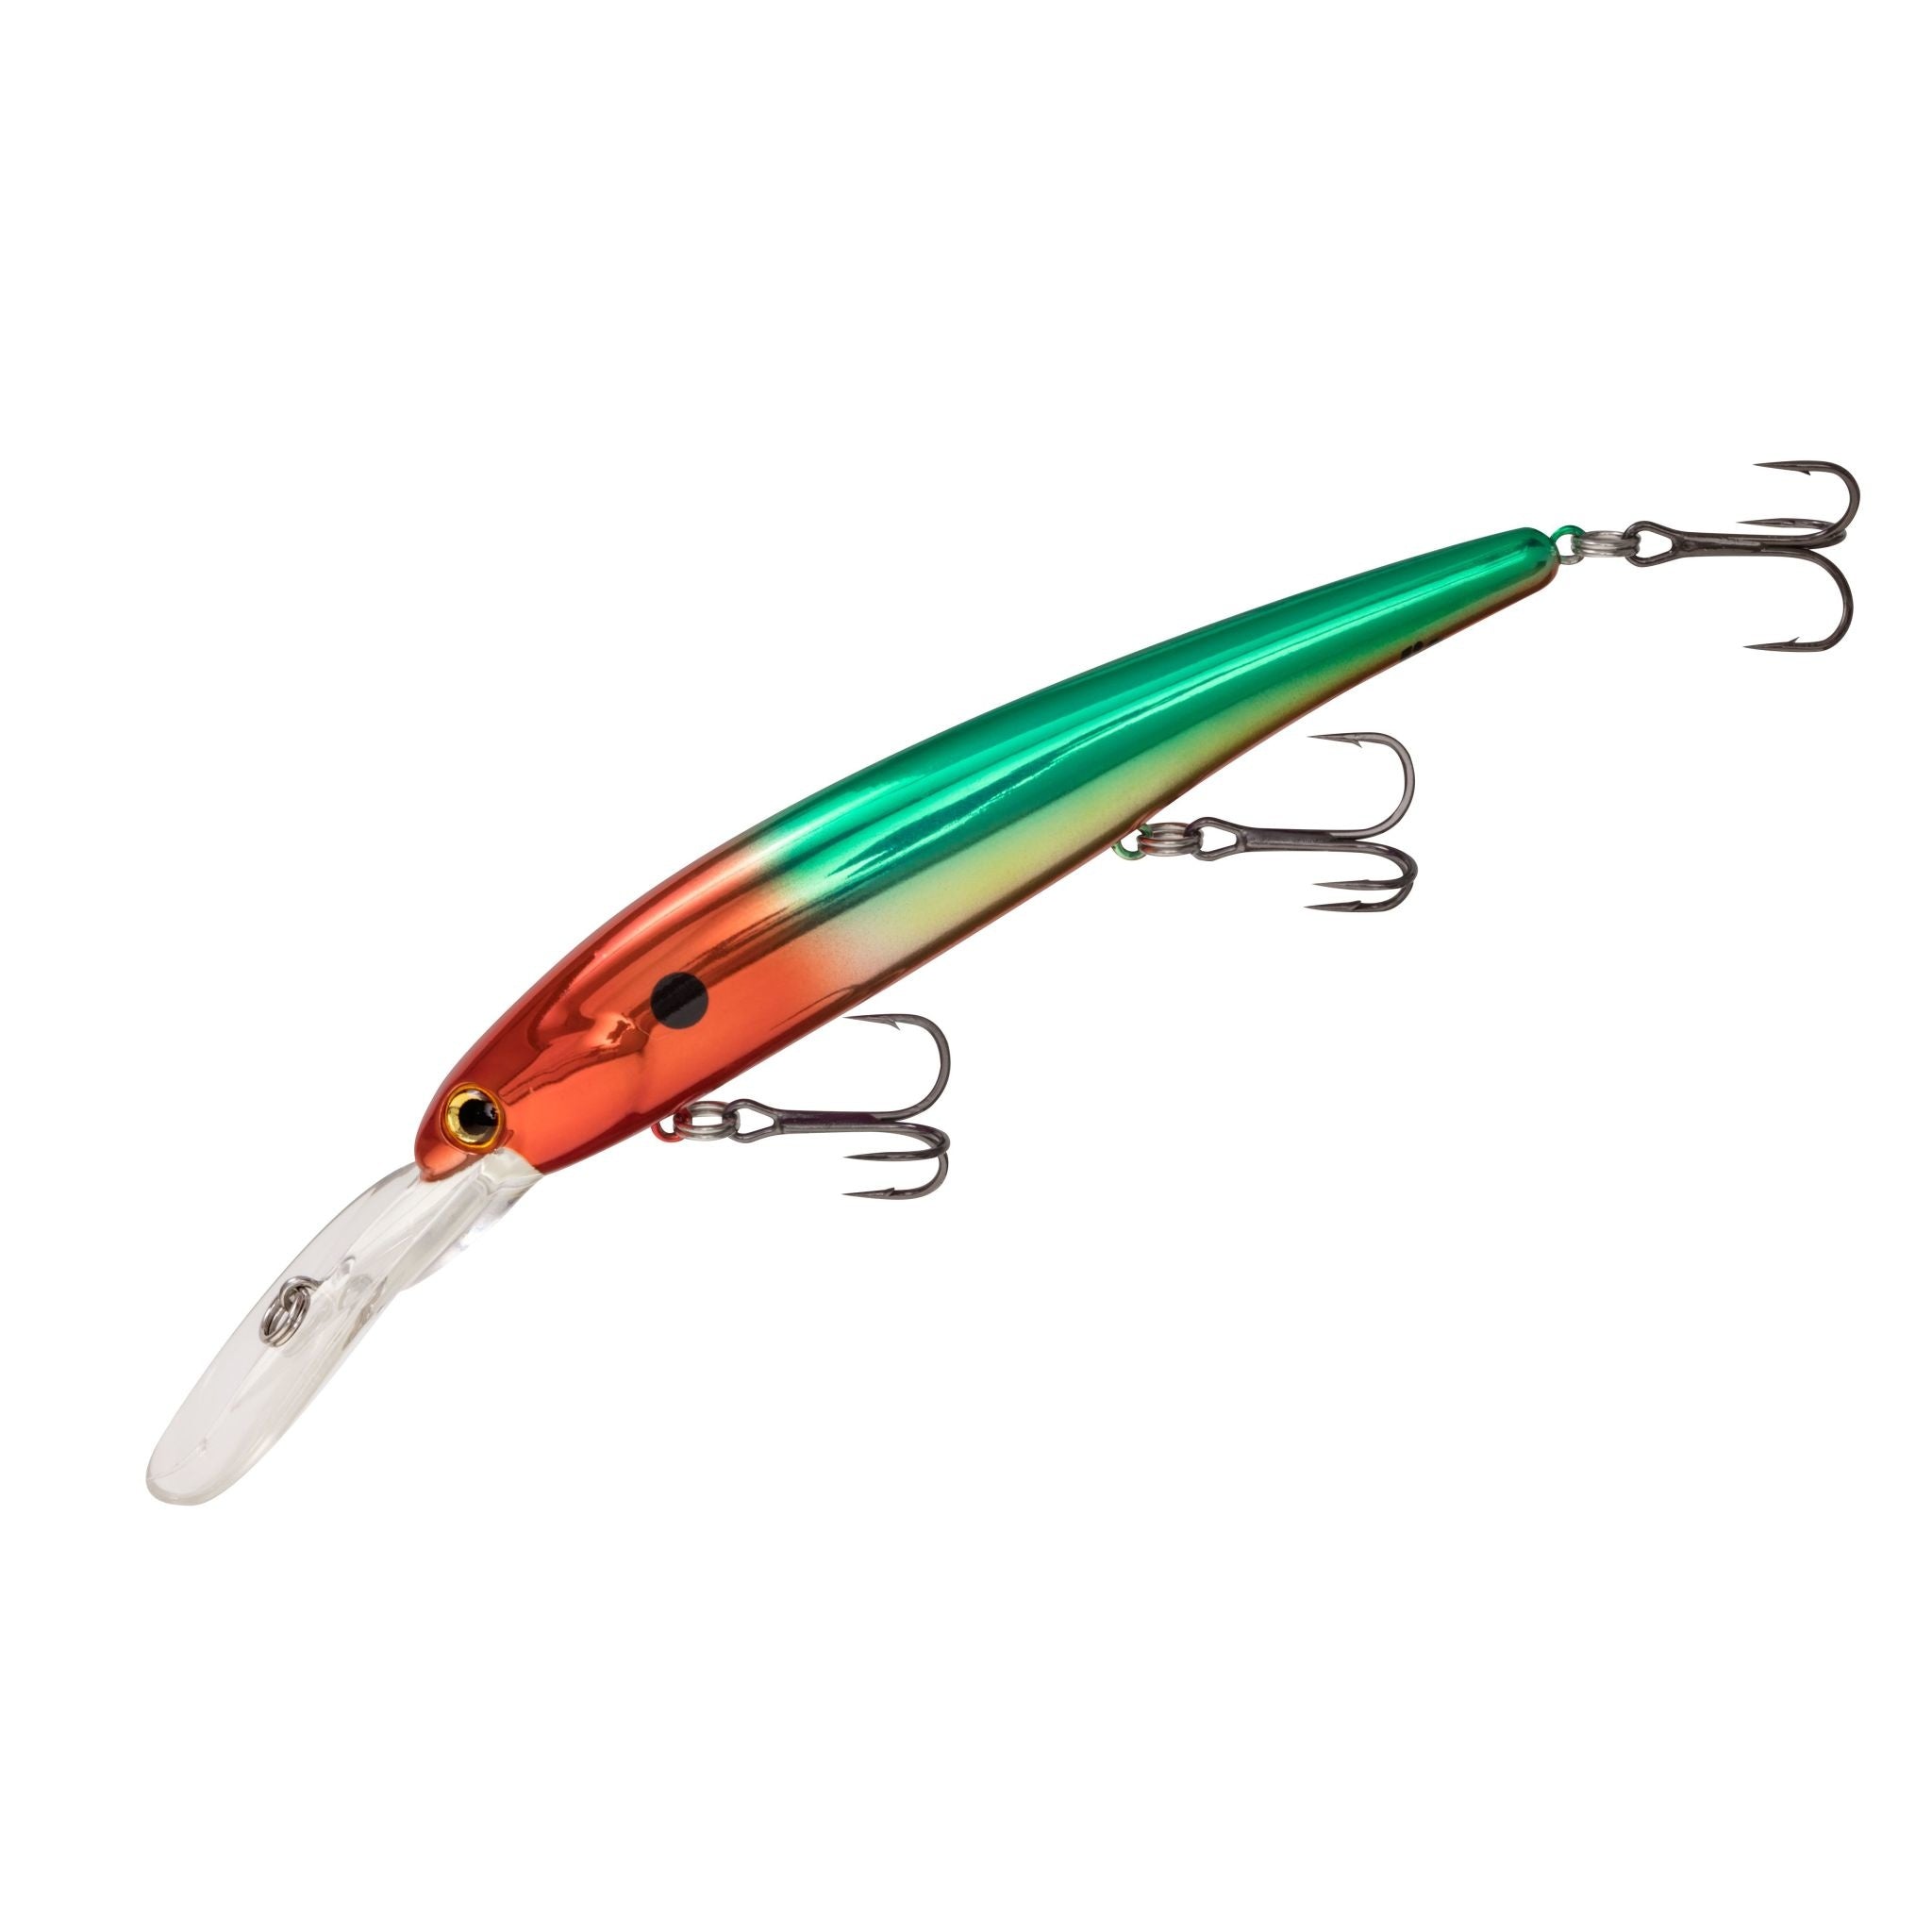 Buy bandit lure Online in Antigua and Barbuda at Low Prices at